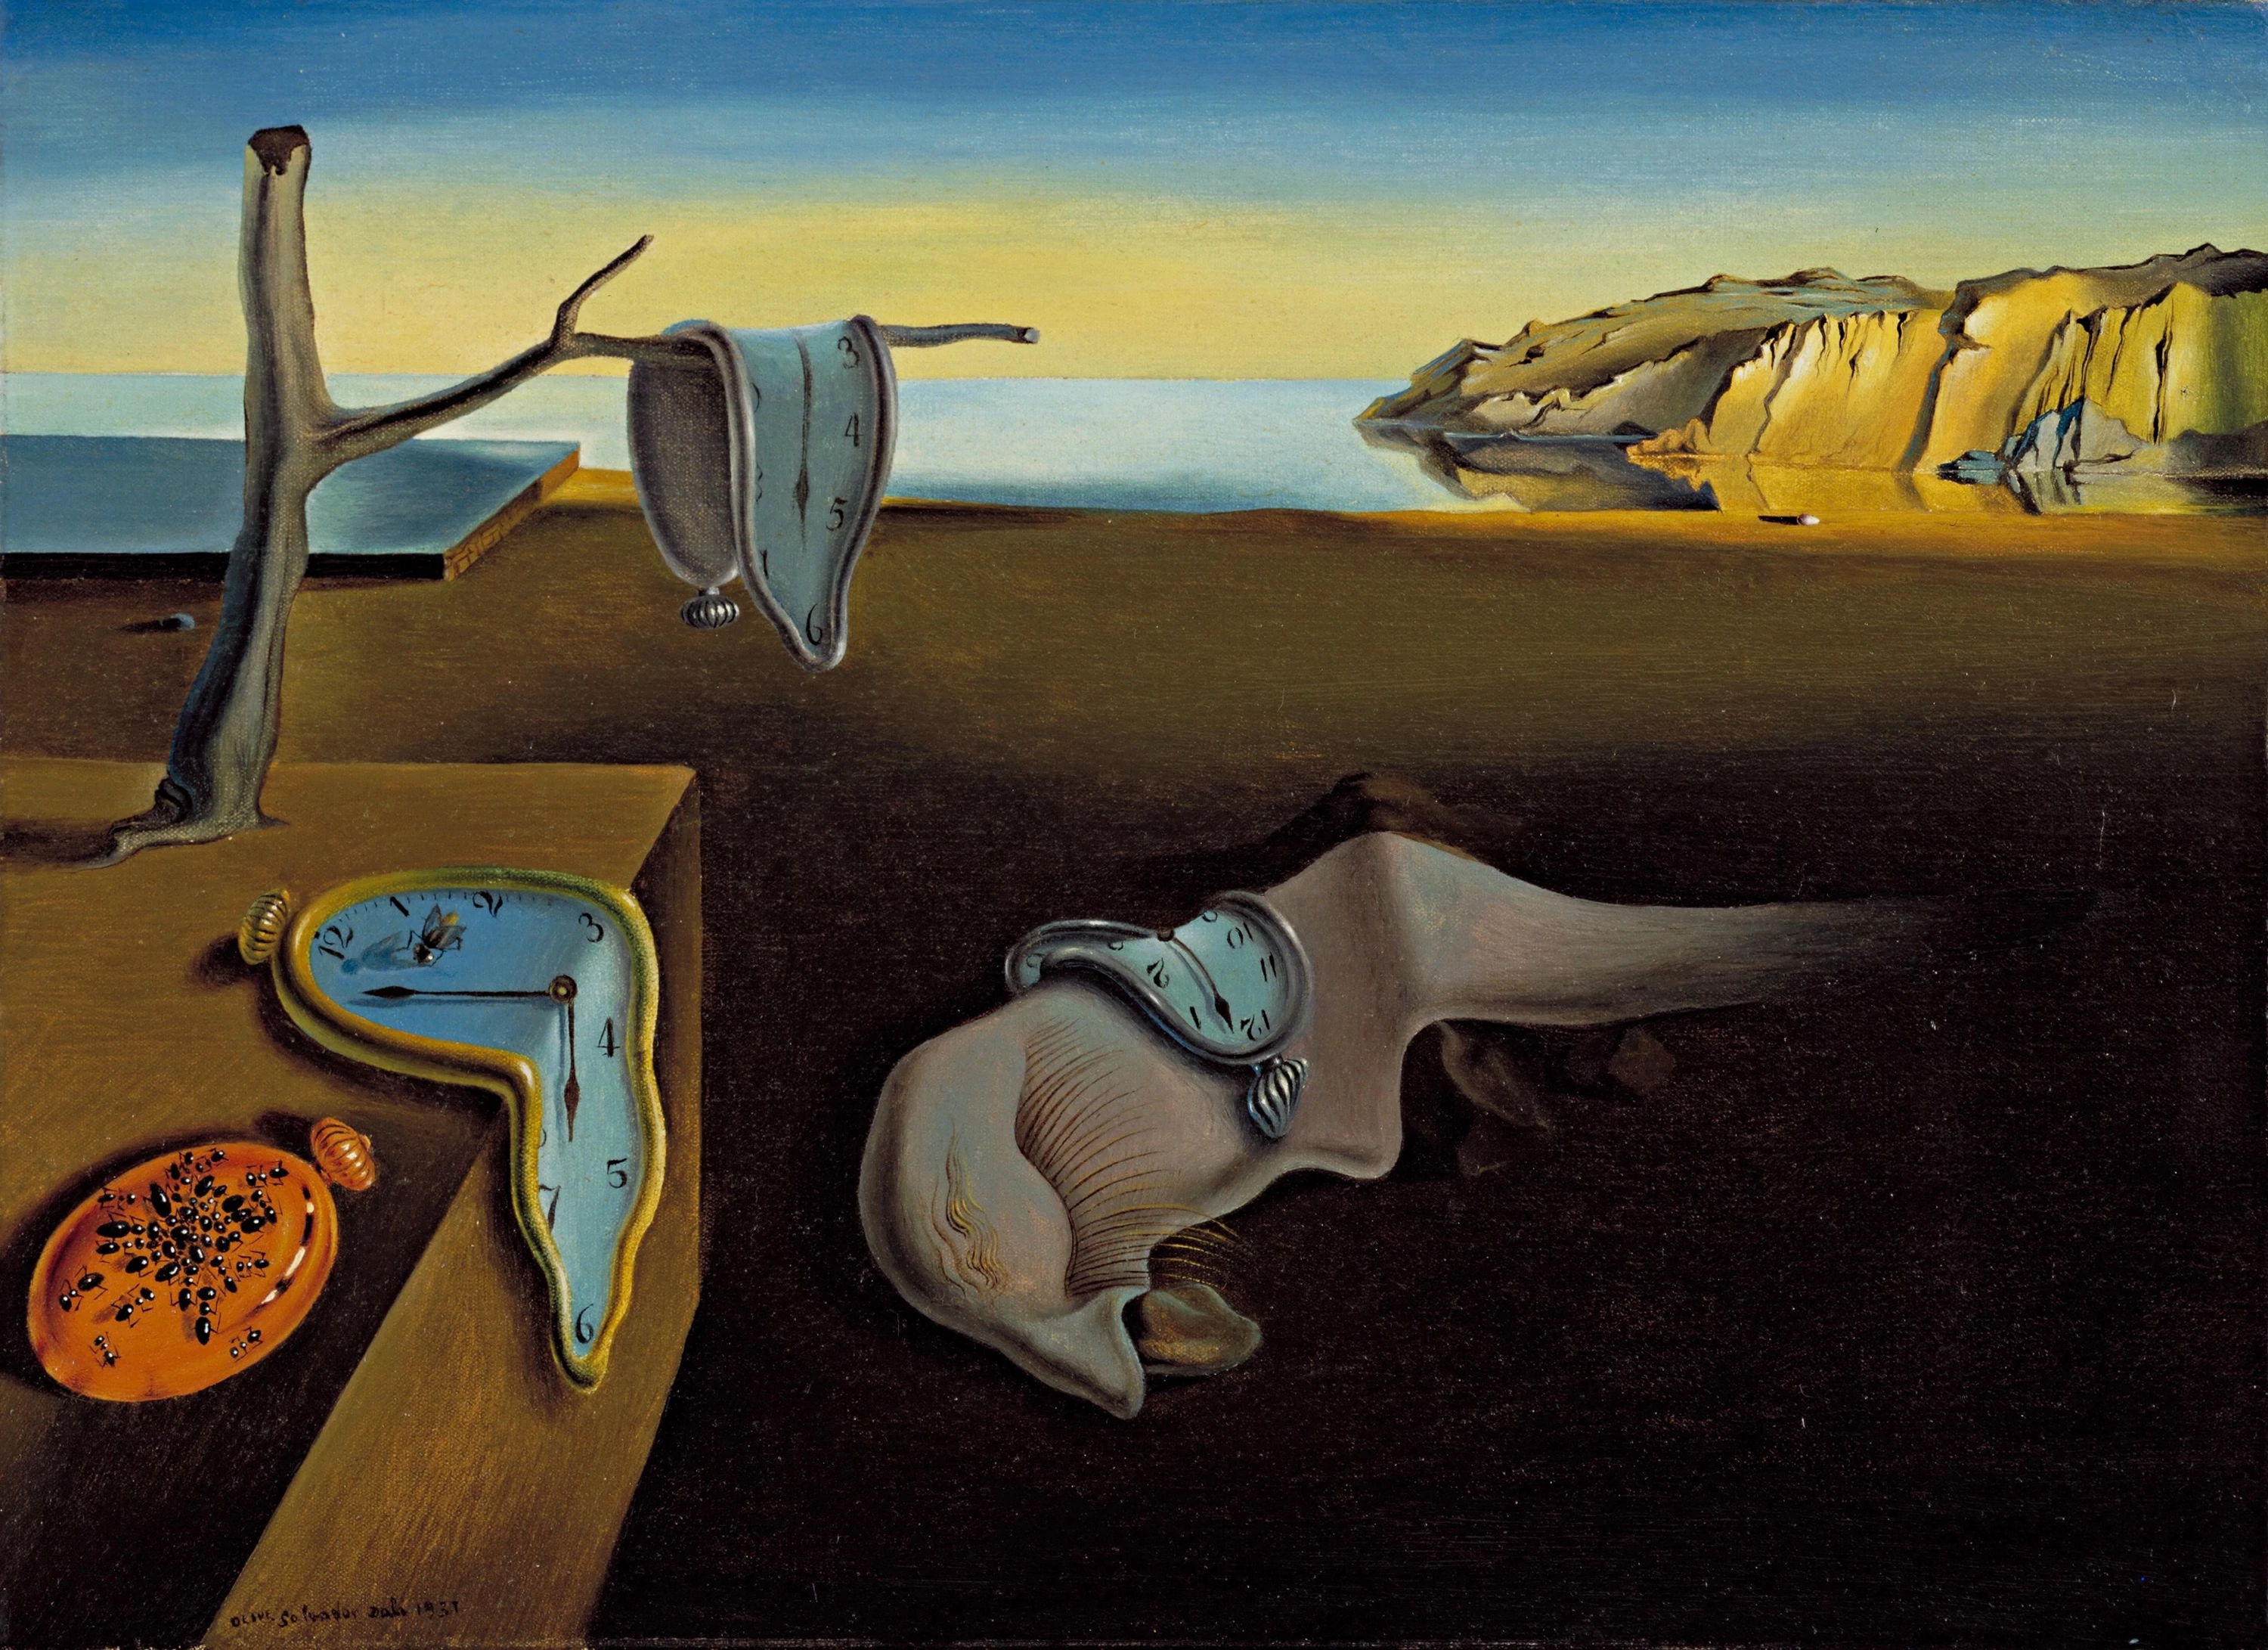 The Persistence of Memory, Salvador Dalí